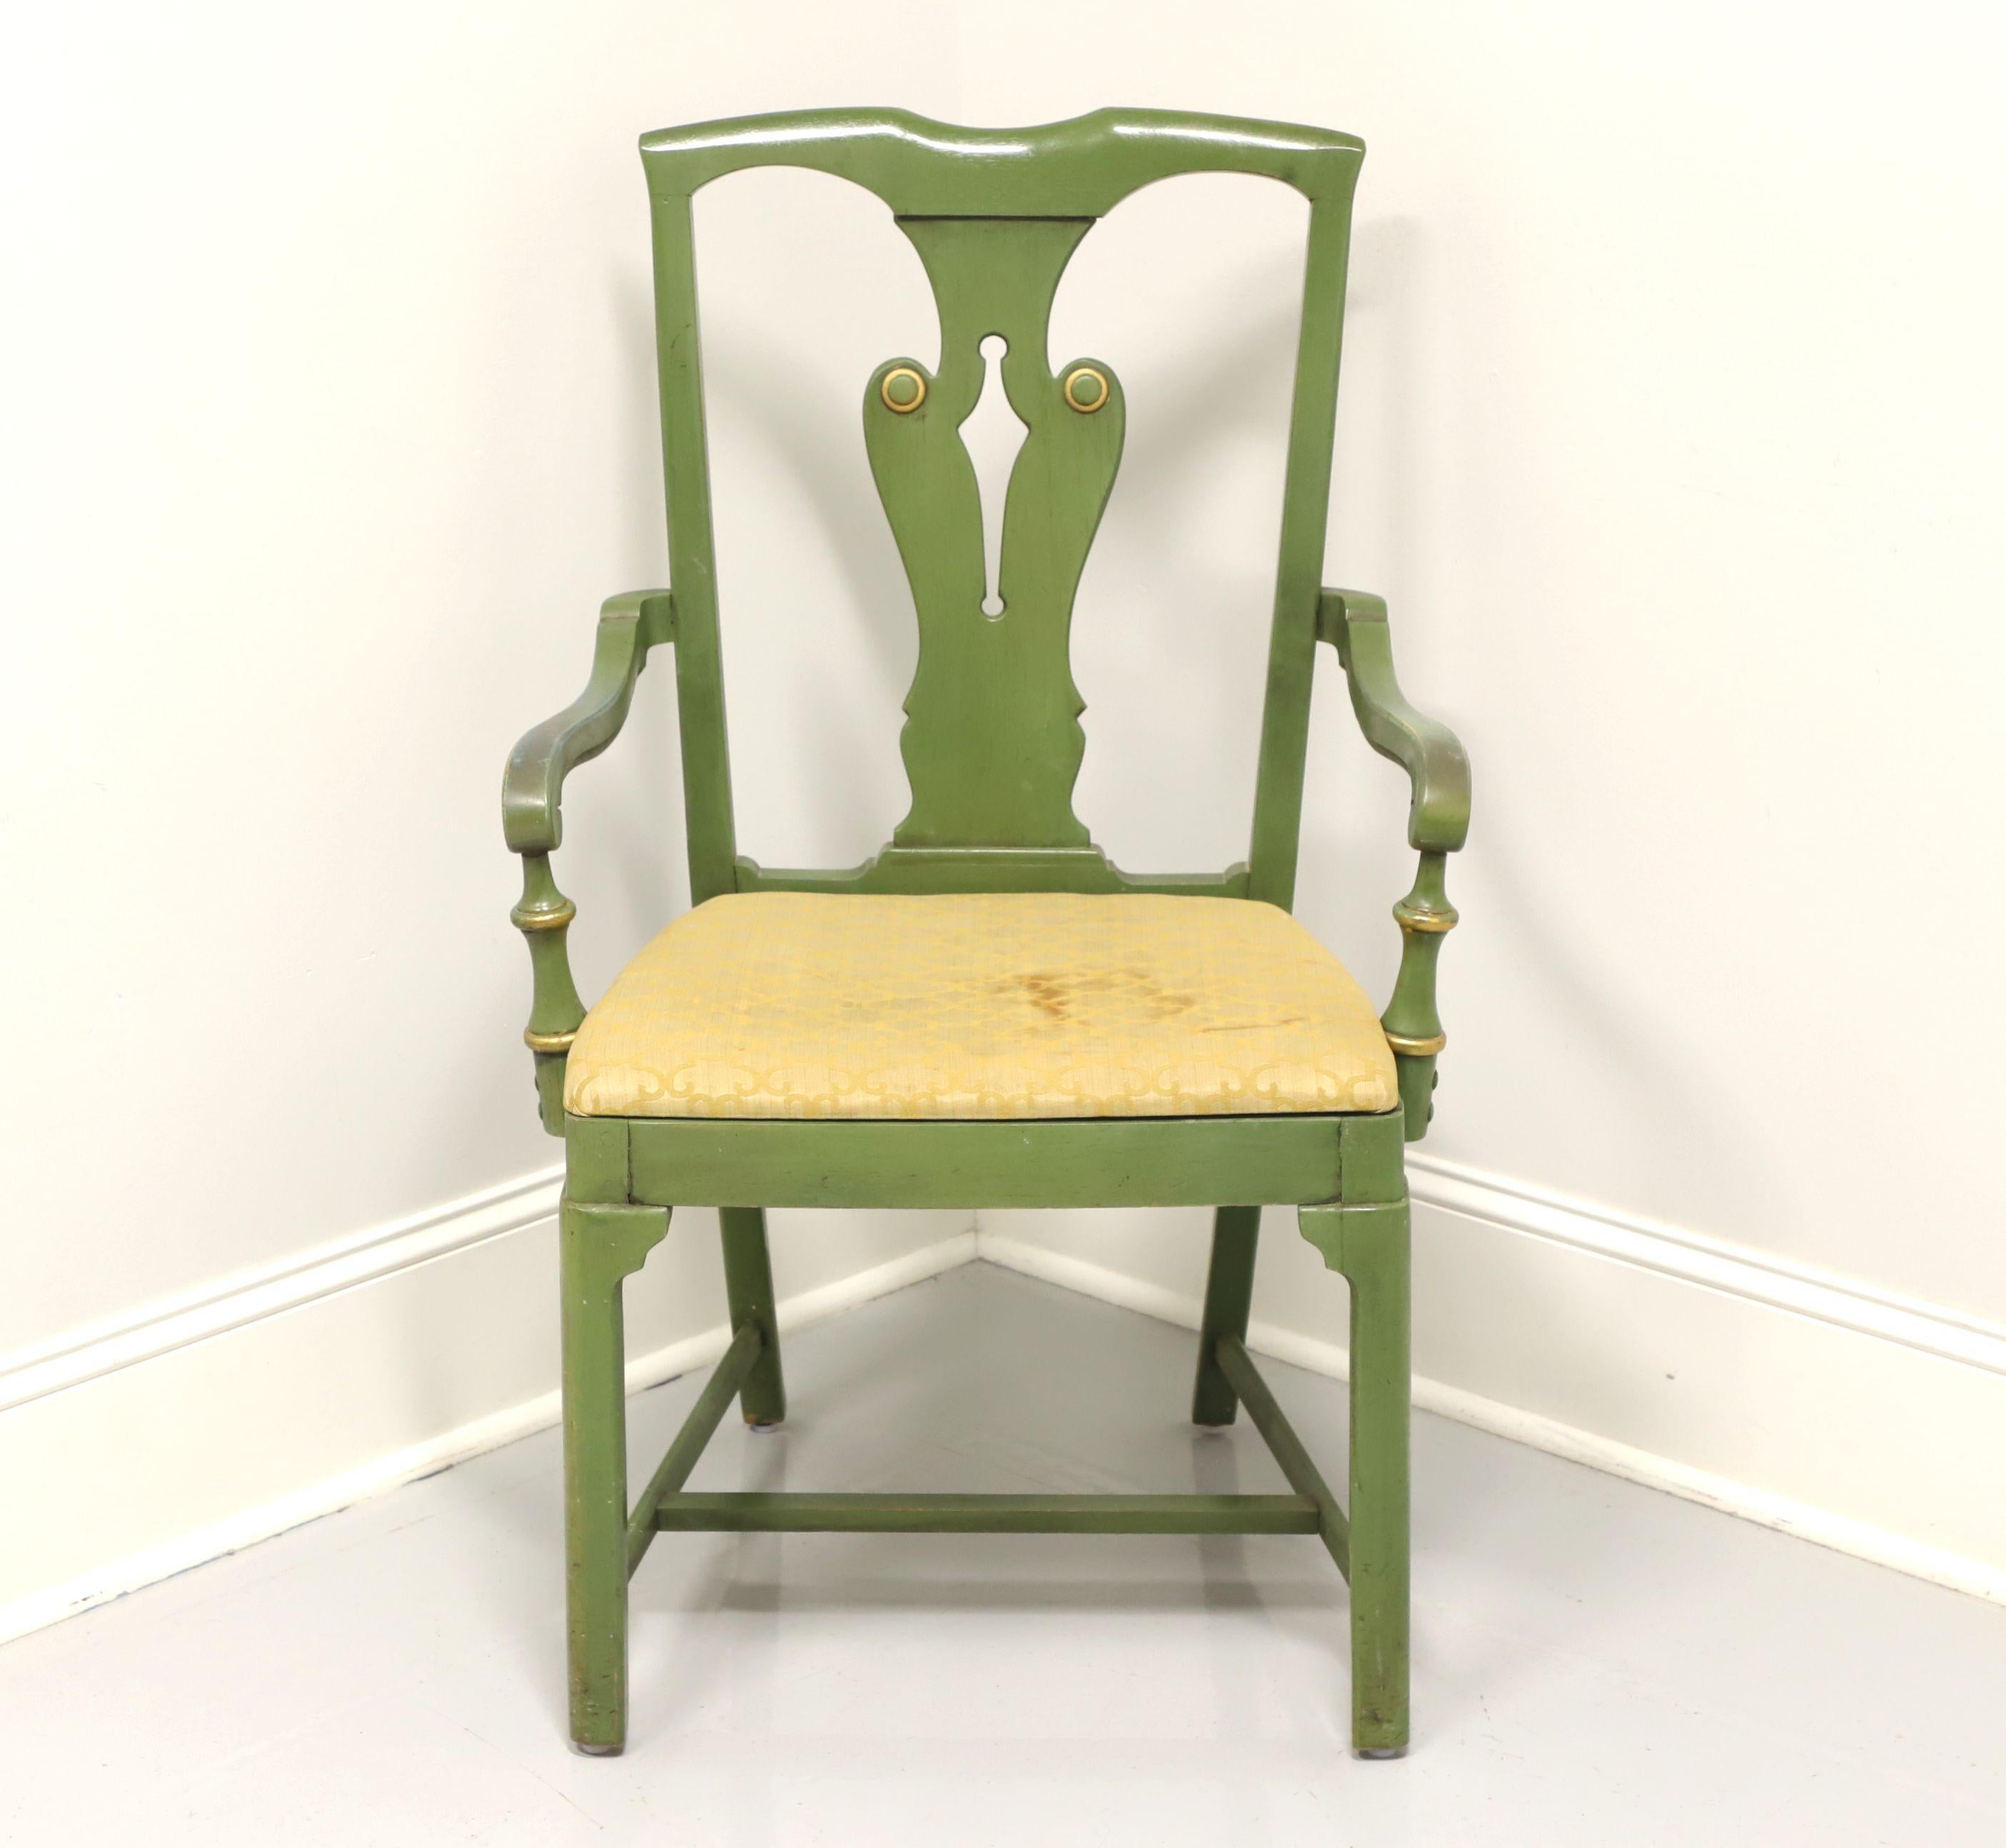 An armchair in the Farmhouse style, unbranded. Green painted hardwood with gold accents, carved crest rail & back splats, curved arms, fabric upholstered seat, straight legs and stretchers. Likely made in USA, in the late 20th Century.

Measures: